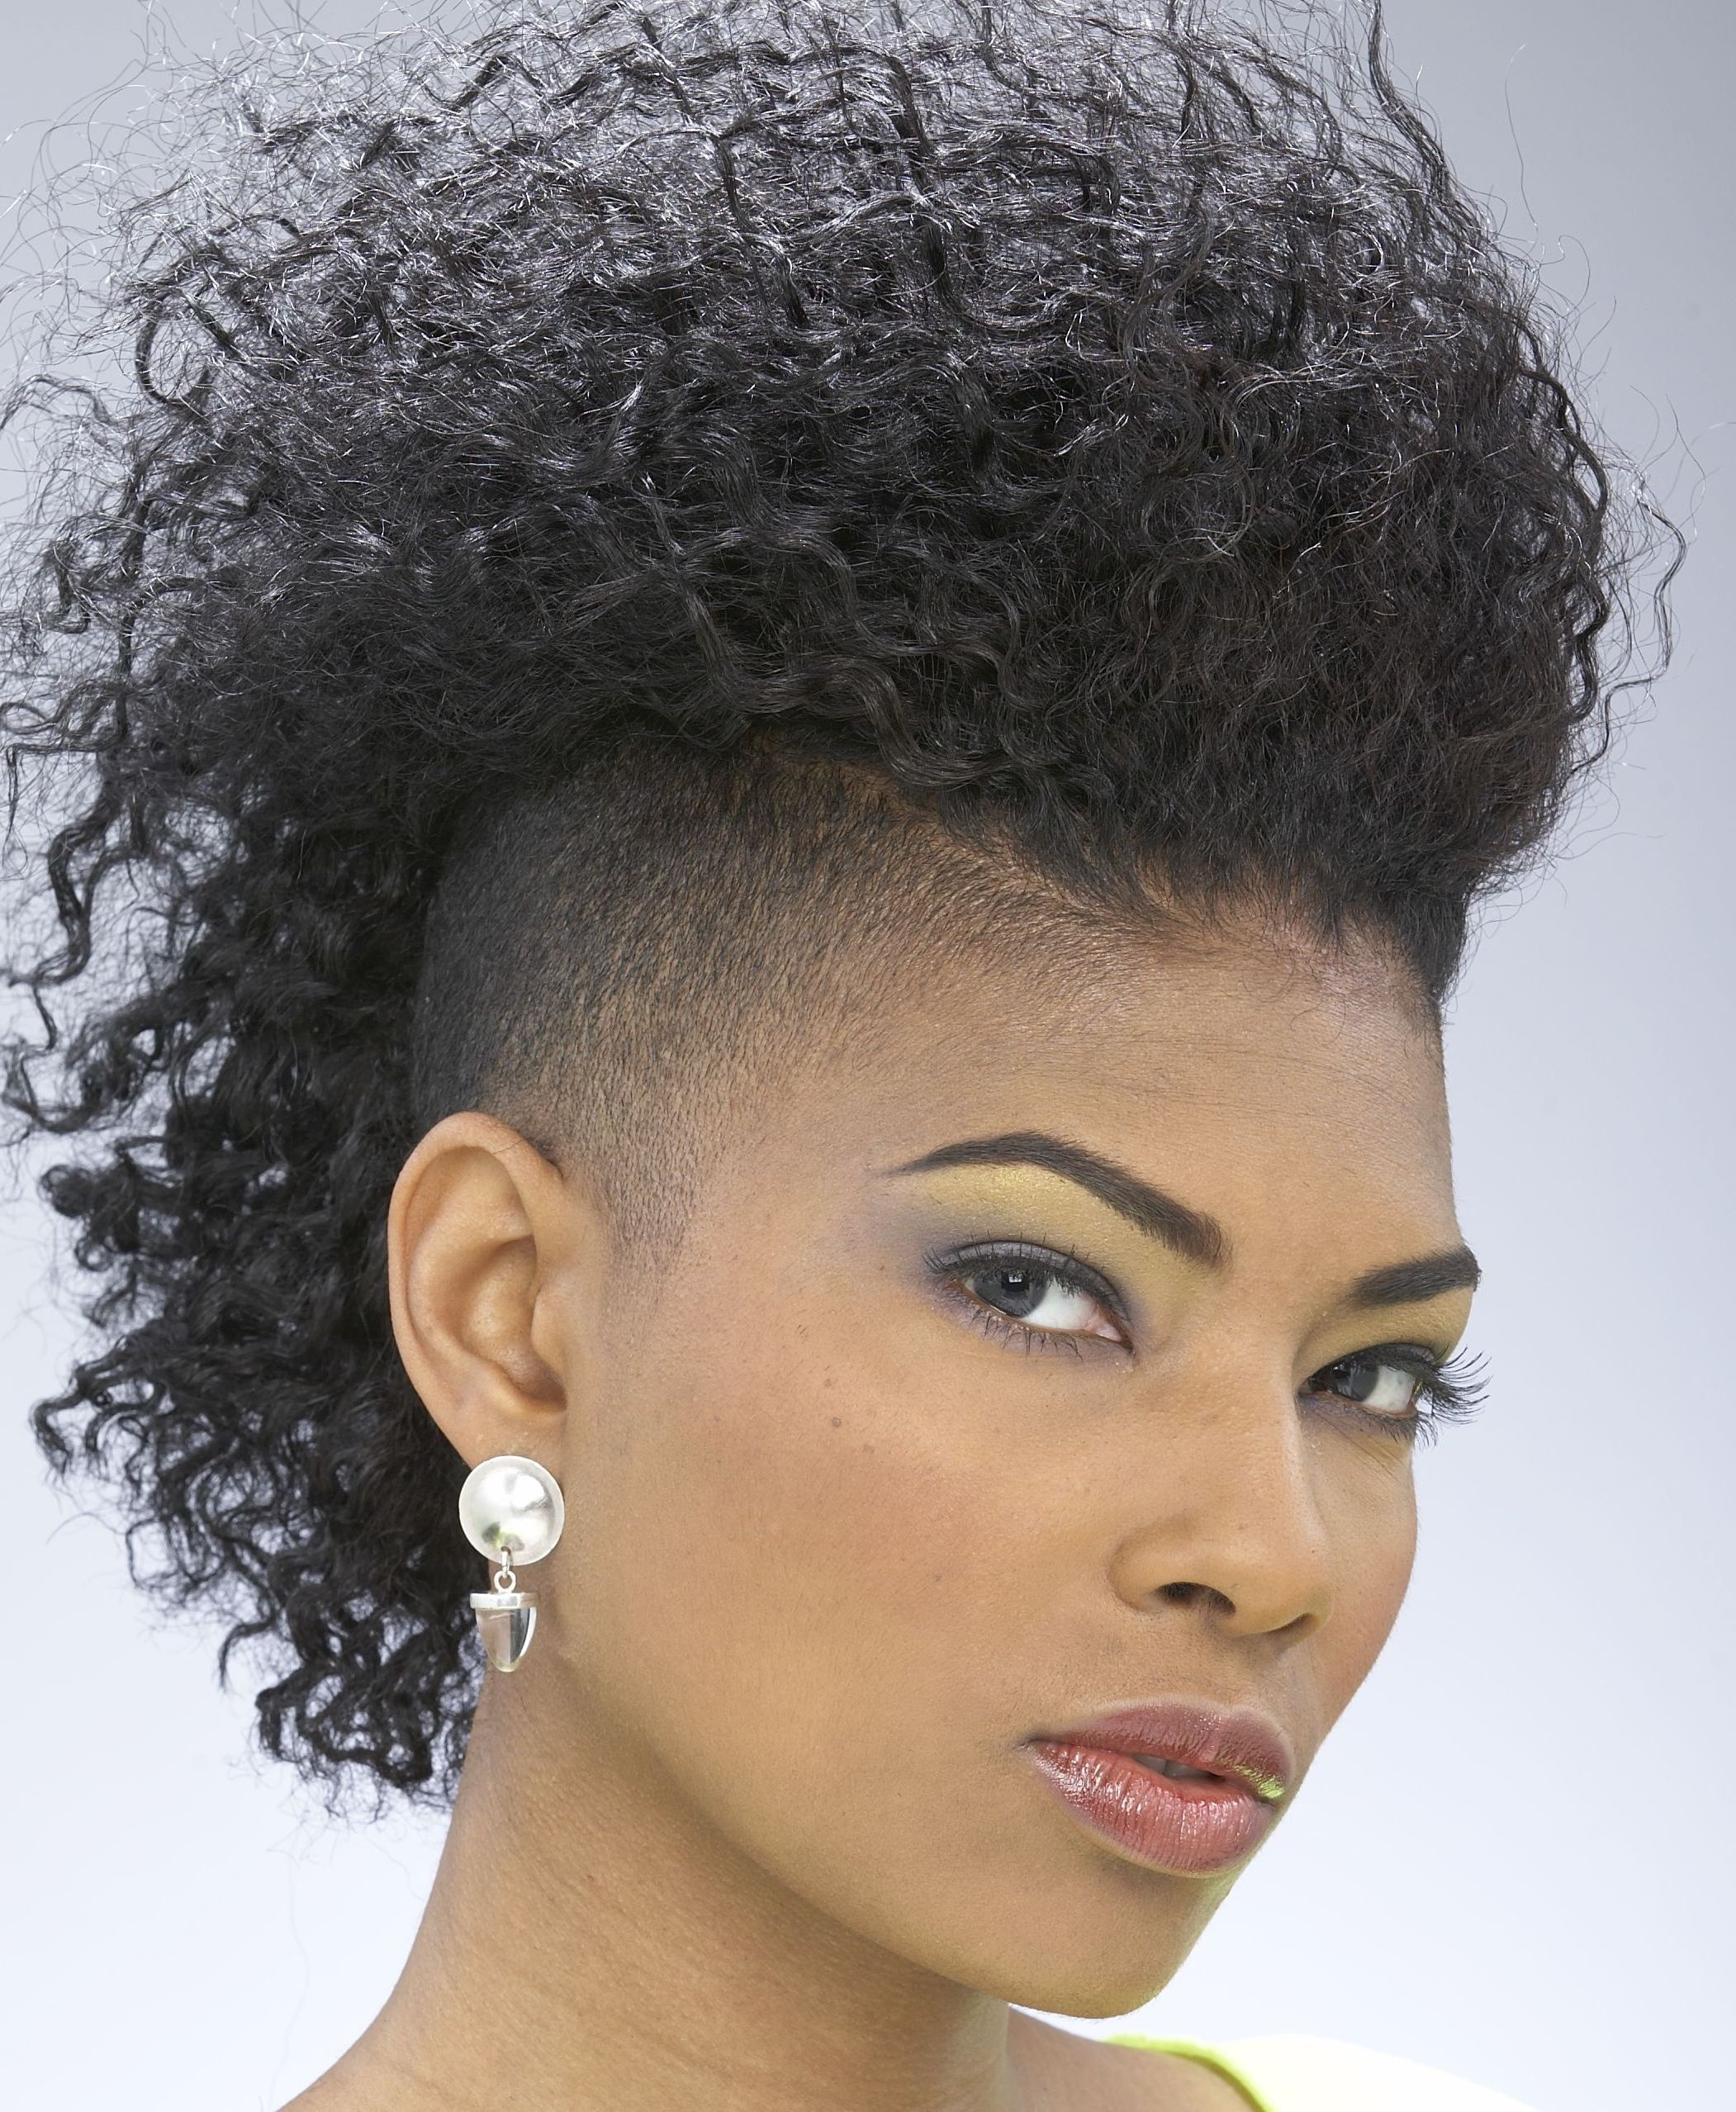 Well Known Short Curly Mohawk Hairstyles Throughout Short Curly Mohawk Hairstyles – Hairstyle For Women & Man (View 2 of 20)